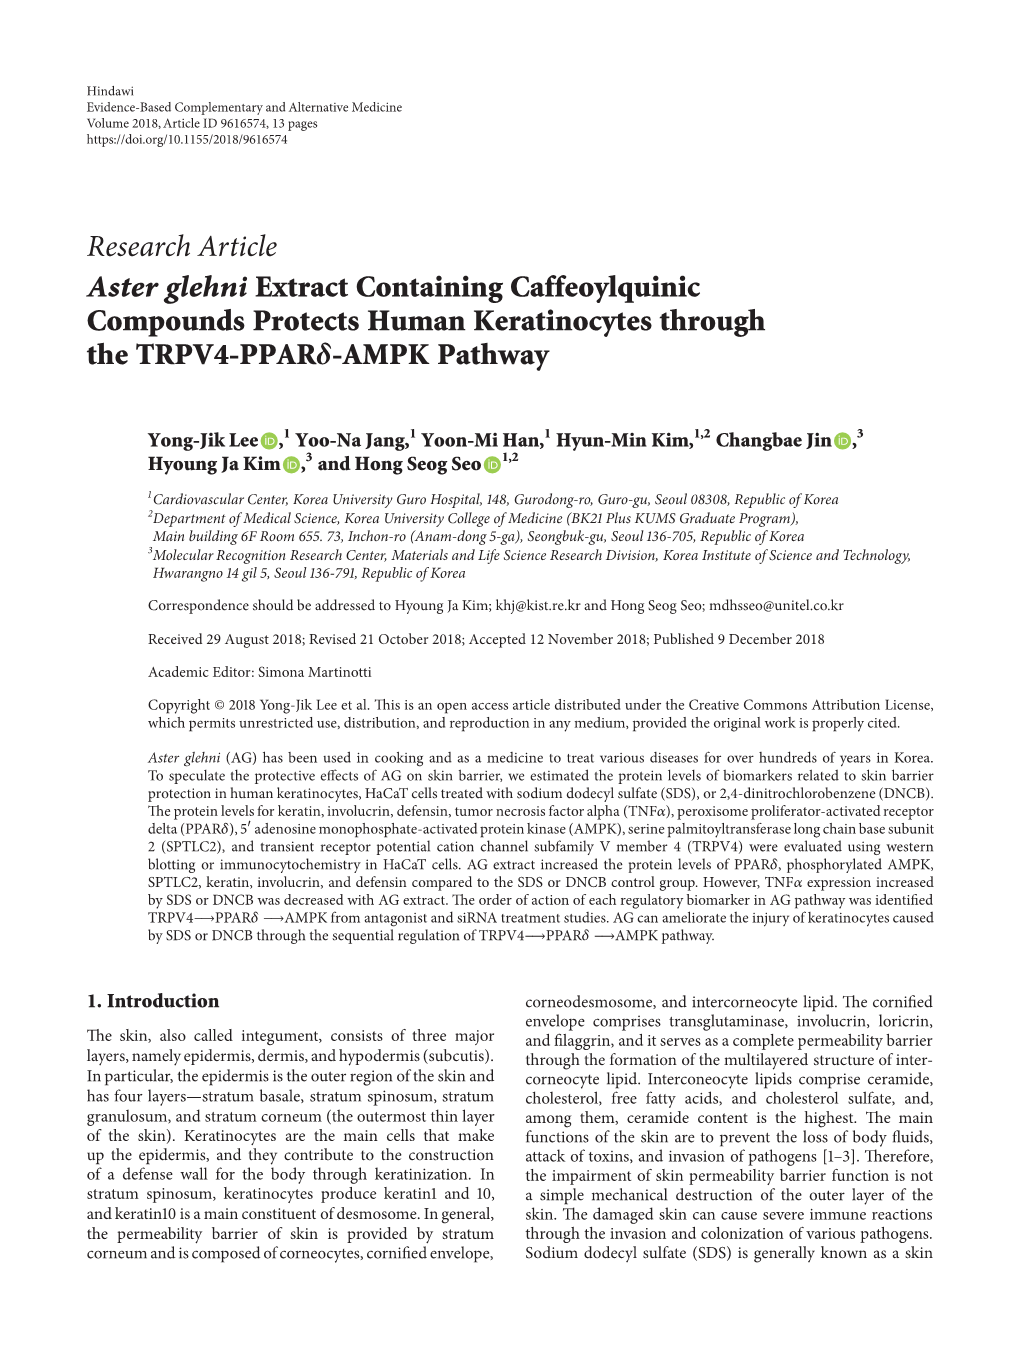 Research Article Aster Glehni Extract Containing Caffeoylquinic Compounds Protects Human Keratinocytes Through the TRPV4-PPAR�-AMPK Pathway